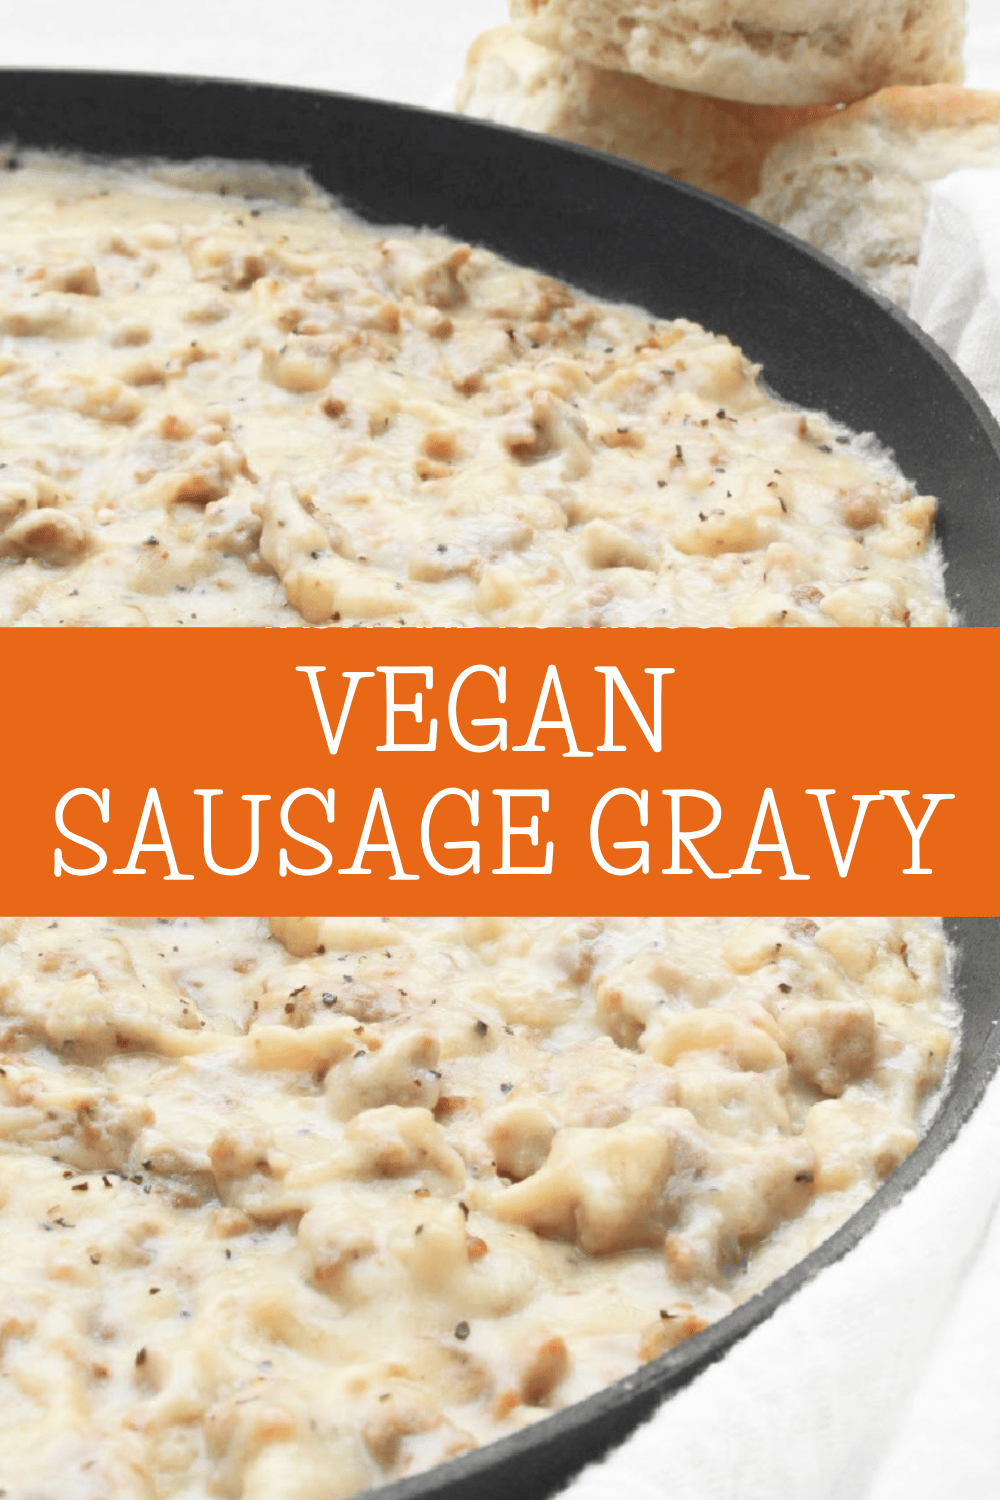 Vegan Sausage Gravy ~ Southern-style sausage gravy made with all plant-based ingredients! Ready to serve in minutes! via @thiswifecooks